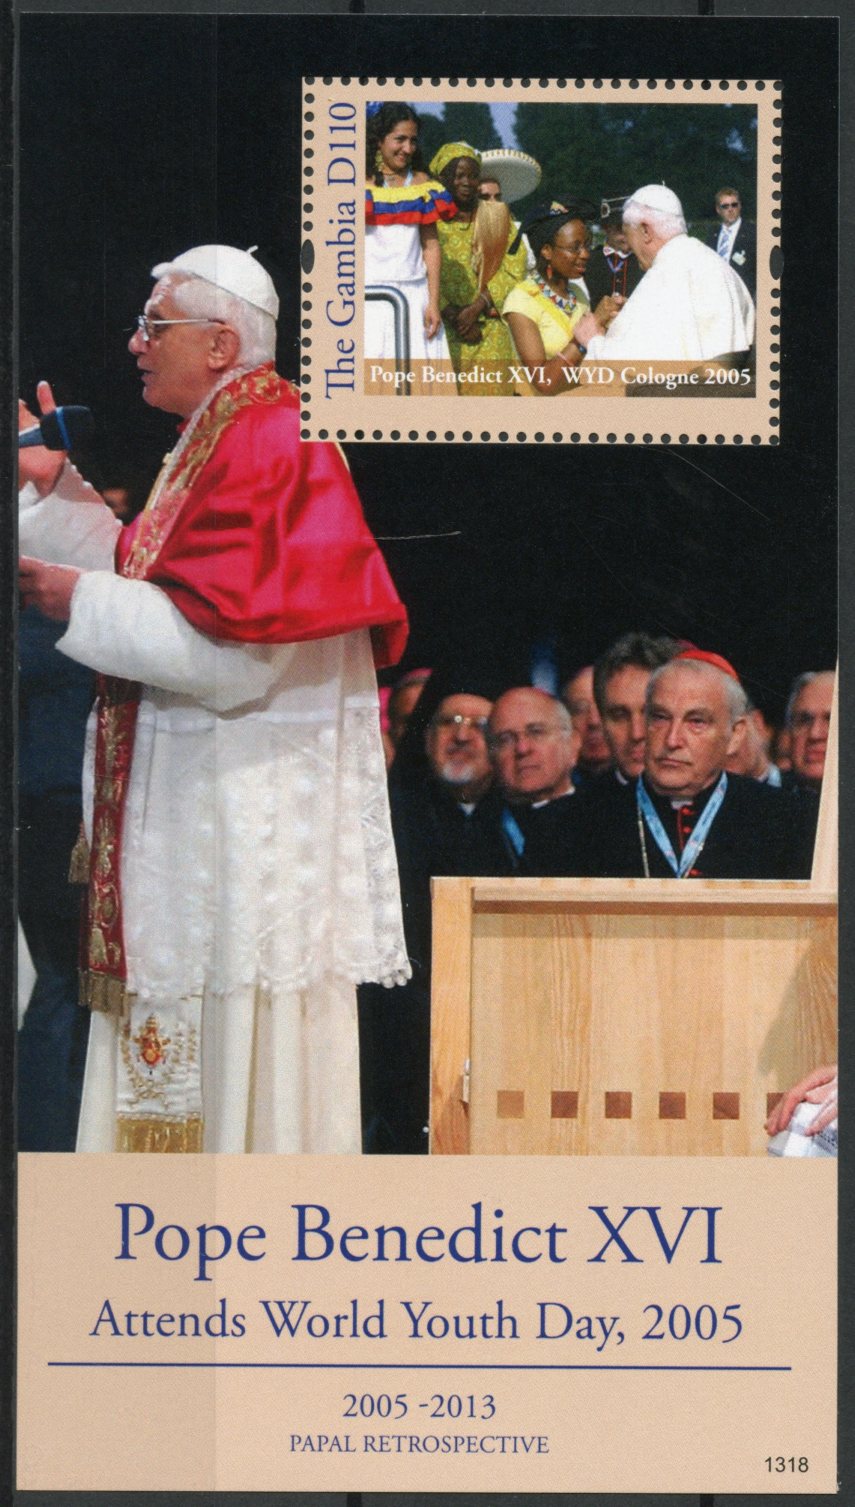 Gambia 2013 MNH Papal Retrospective Pope Benedict XVI World Youth Day 1v S/S